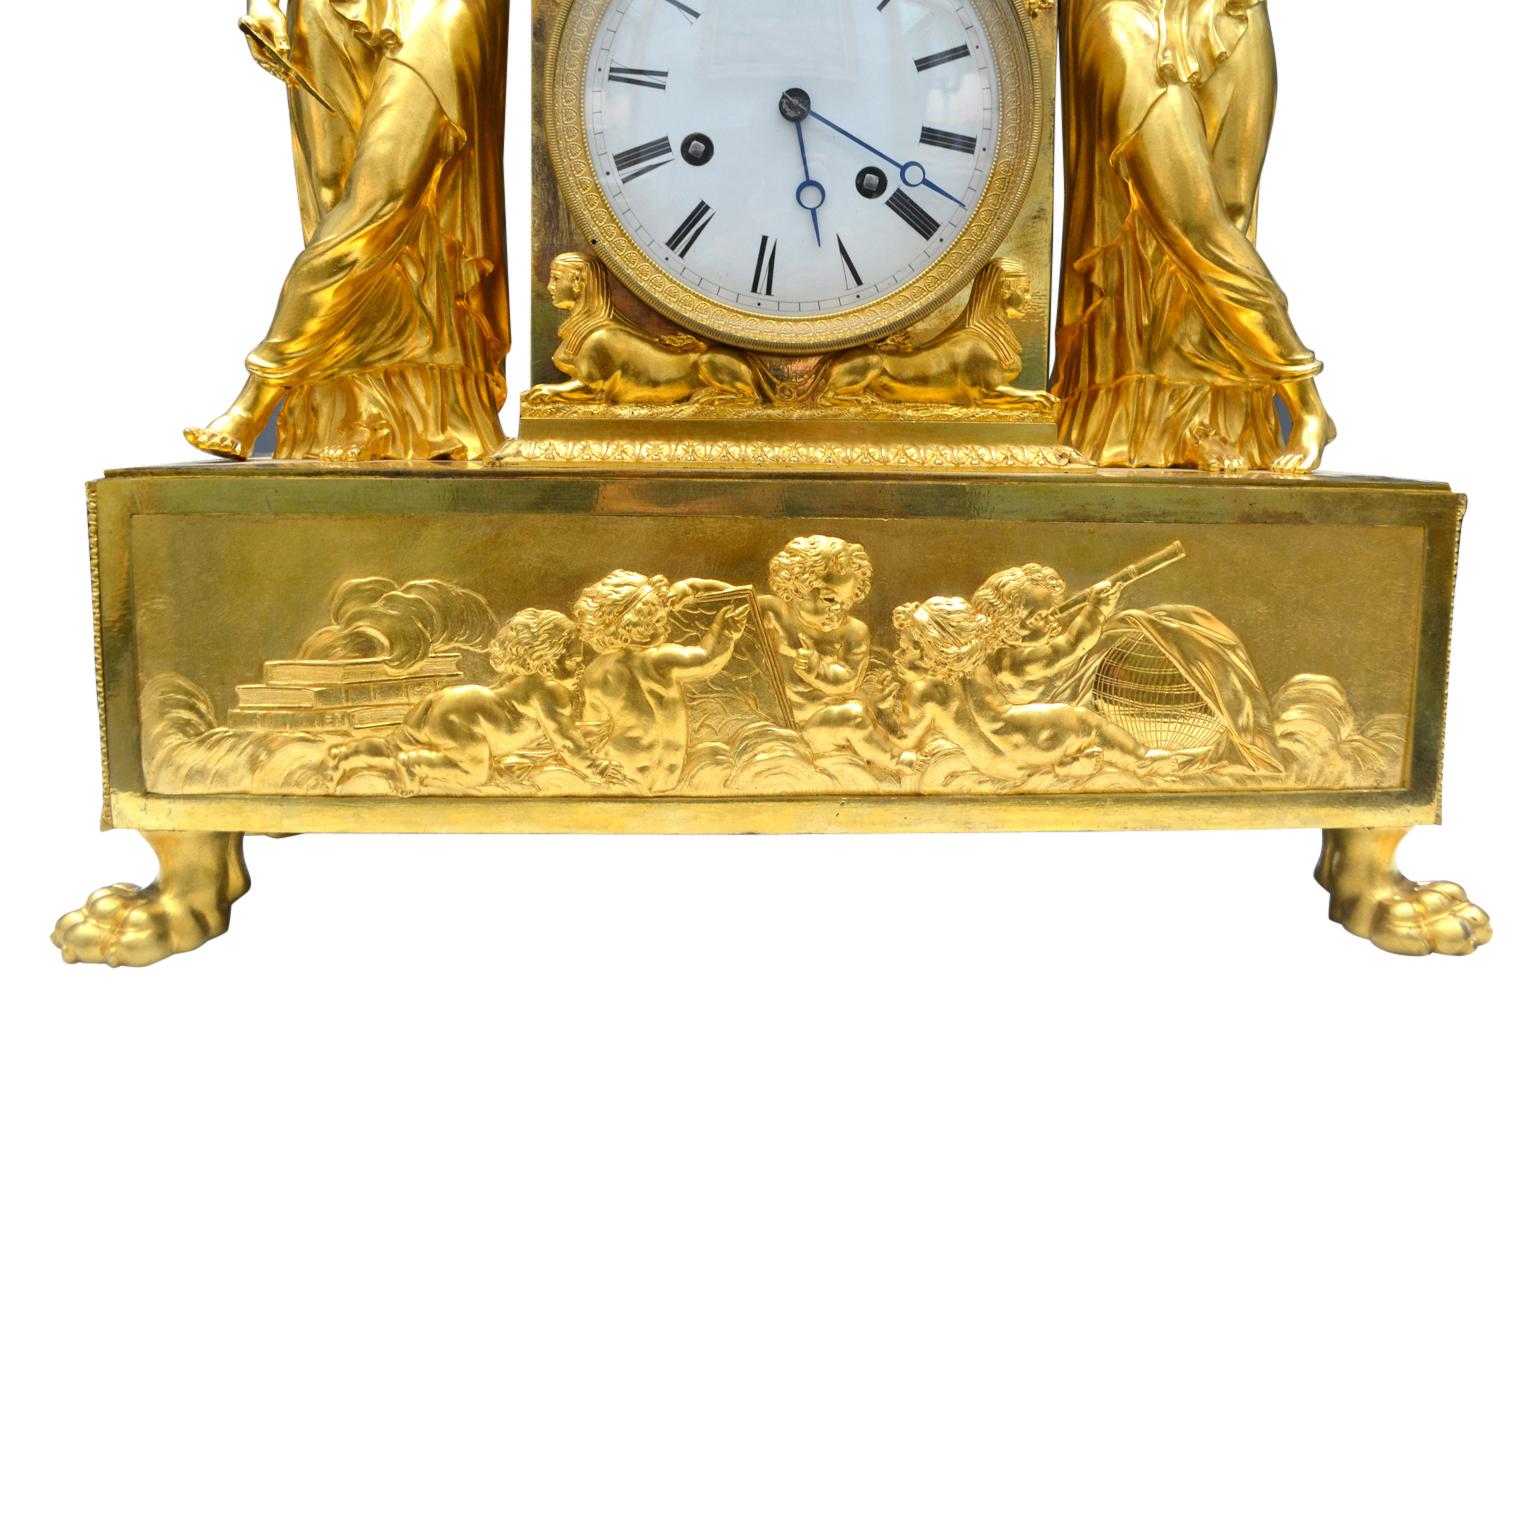 19th Century  French Empire Gilt Bronze Allegorical Clock Depicting the Astronomical Sciences For Sale